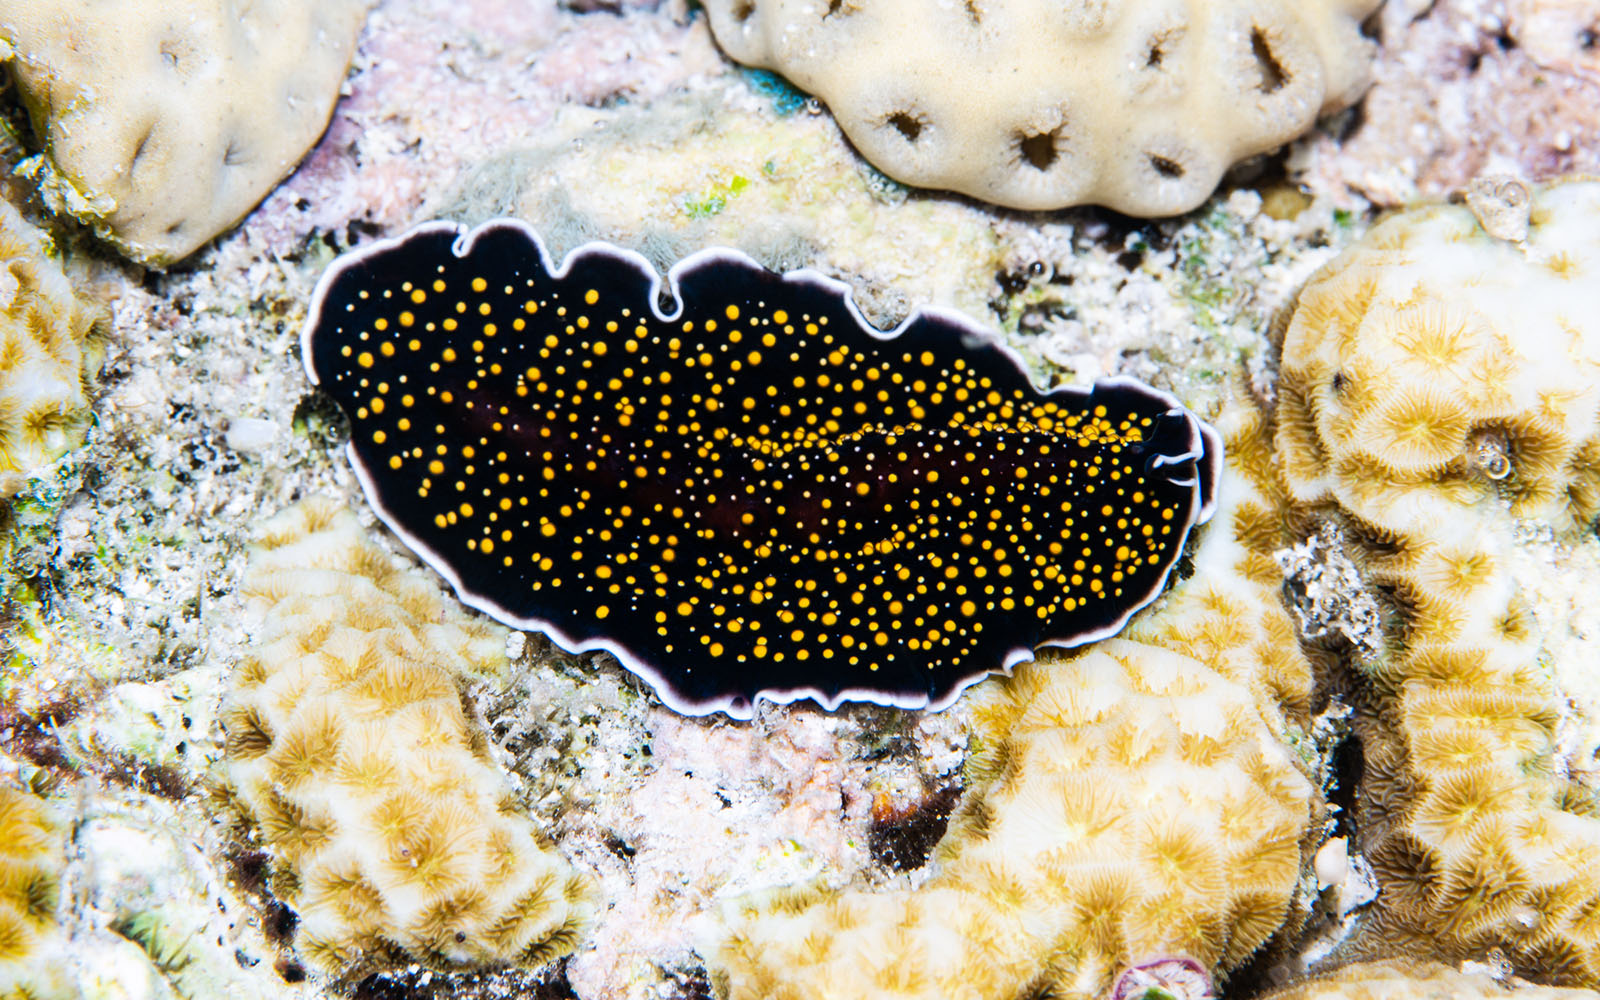 Starry flatworm photographed while snorkeling on a snorkel vacations snorkeling tour to Raja Ampat